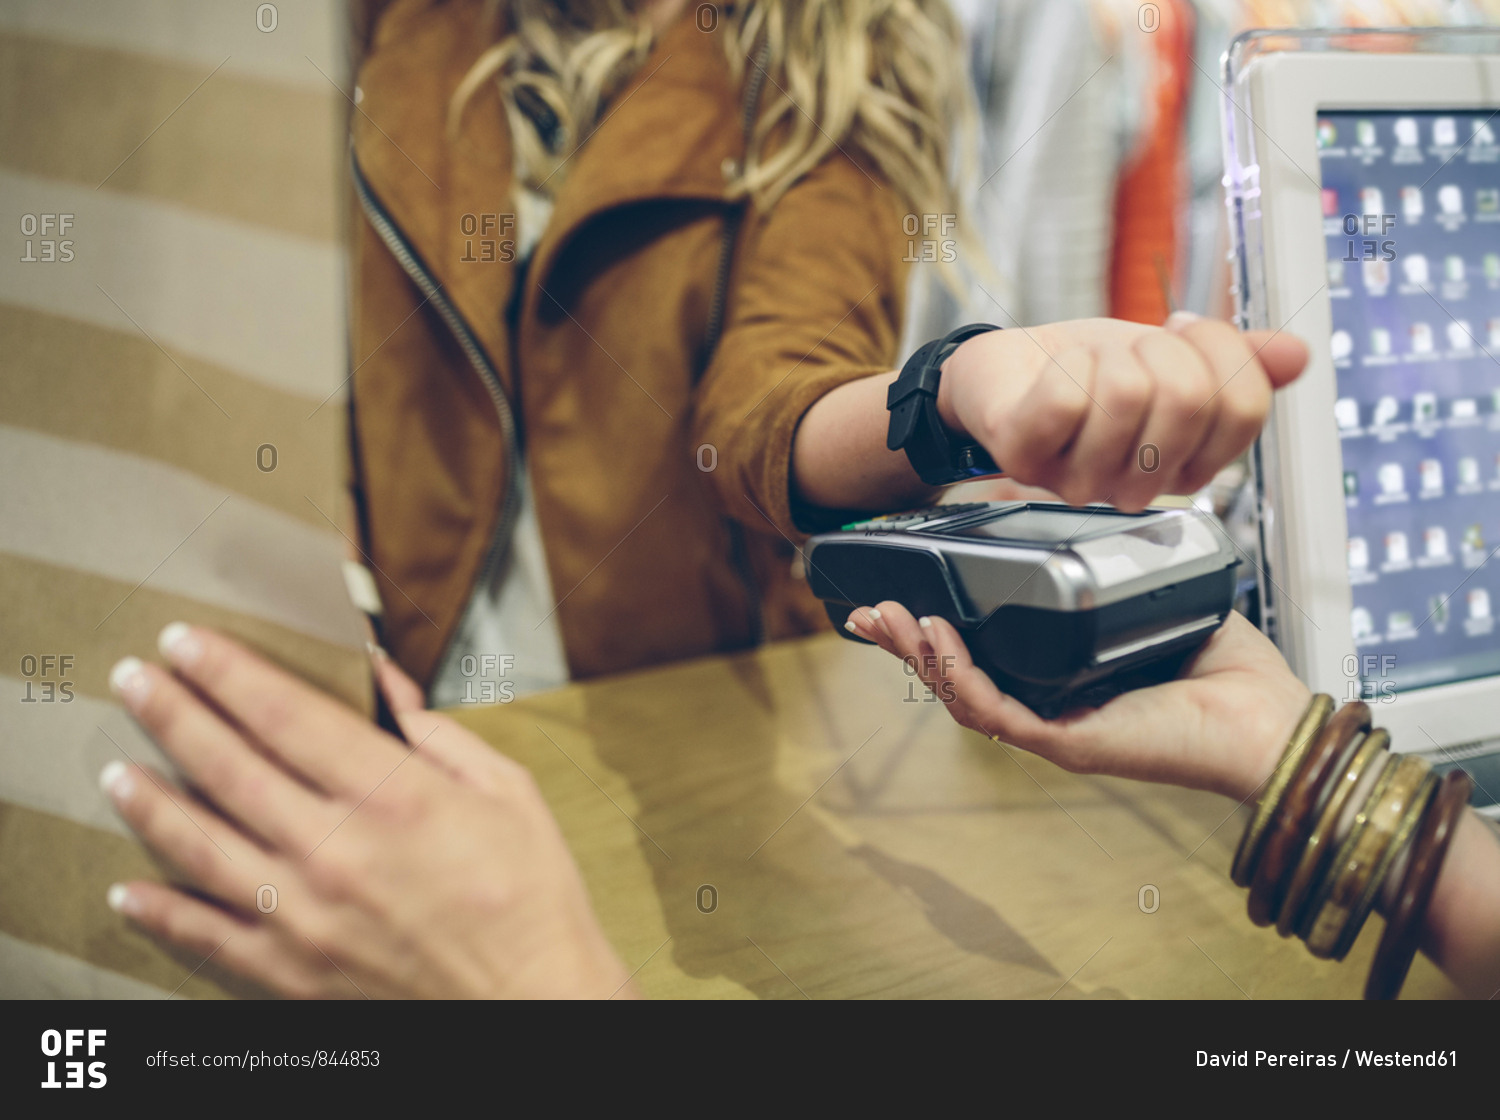 Woman paying using smartwatch with NFC technology in a store